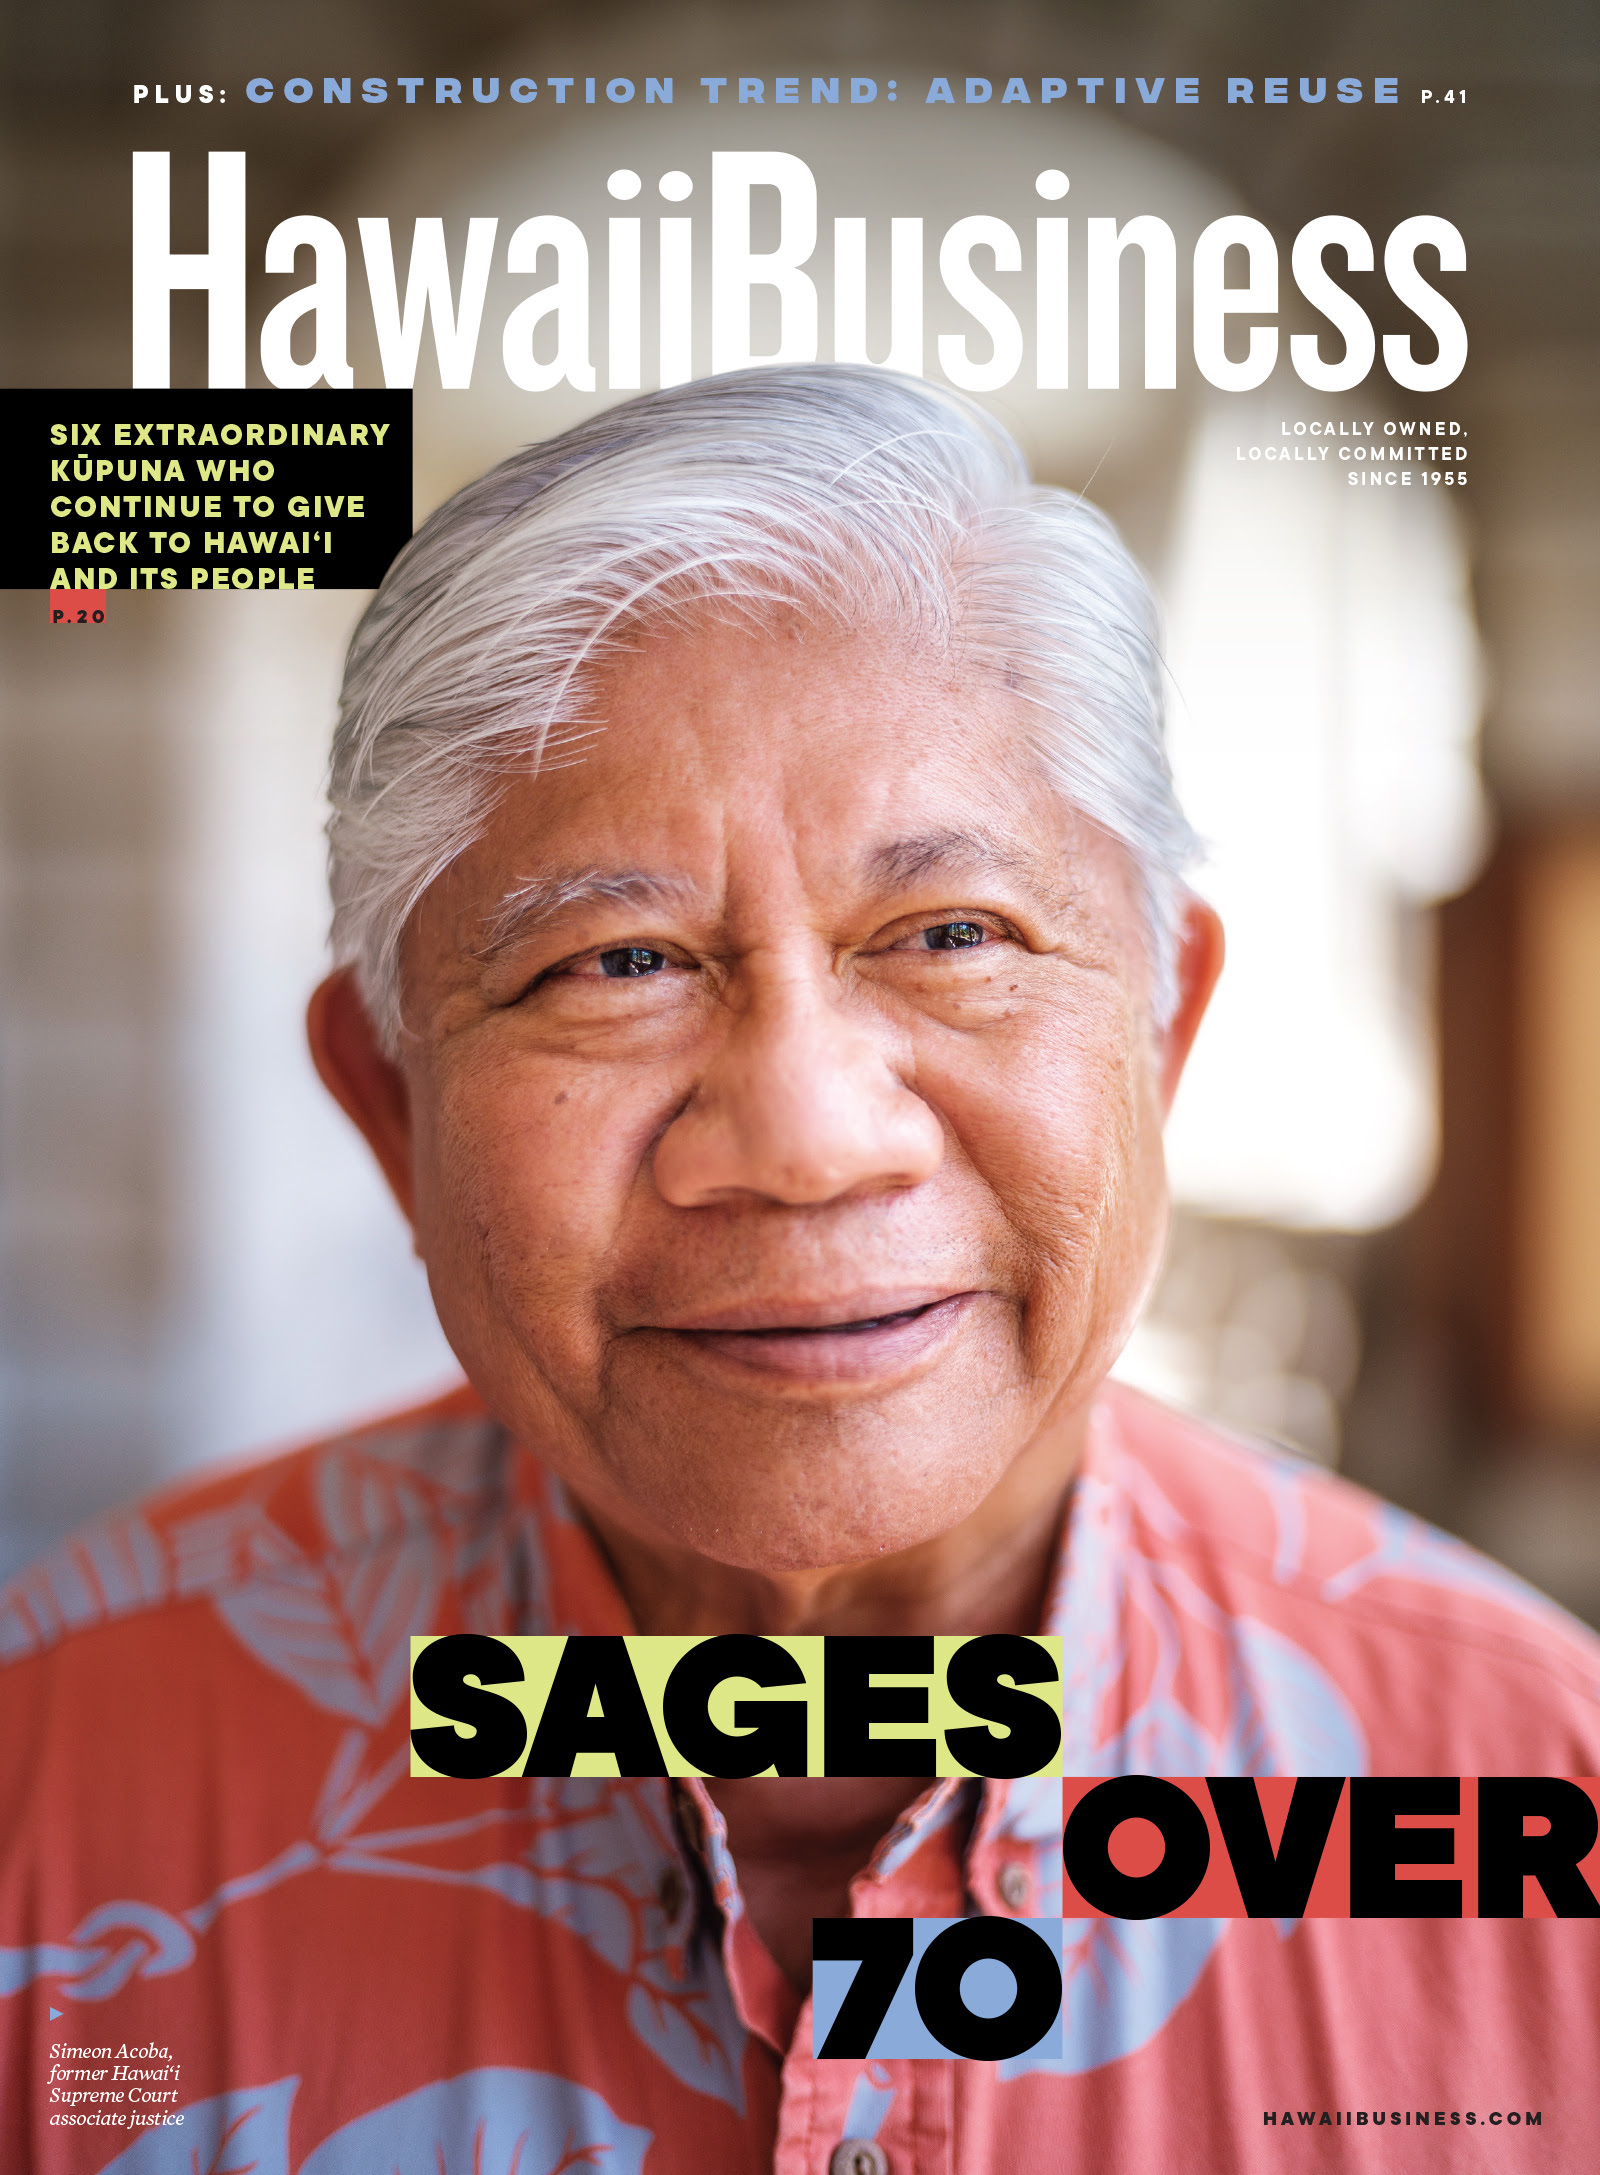 Click here to get your copy of Hawaii Business' September 2021 issue!